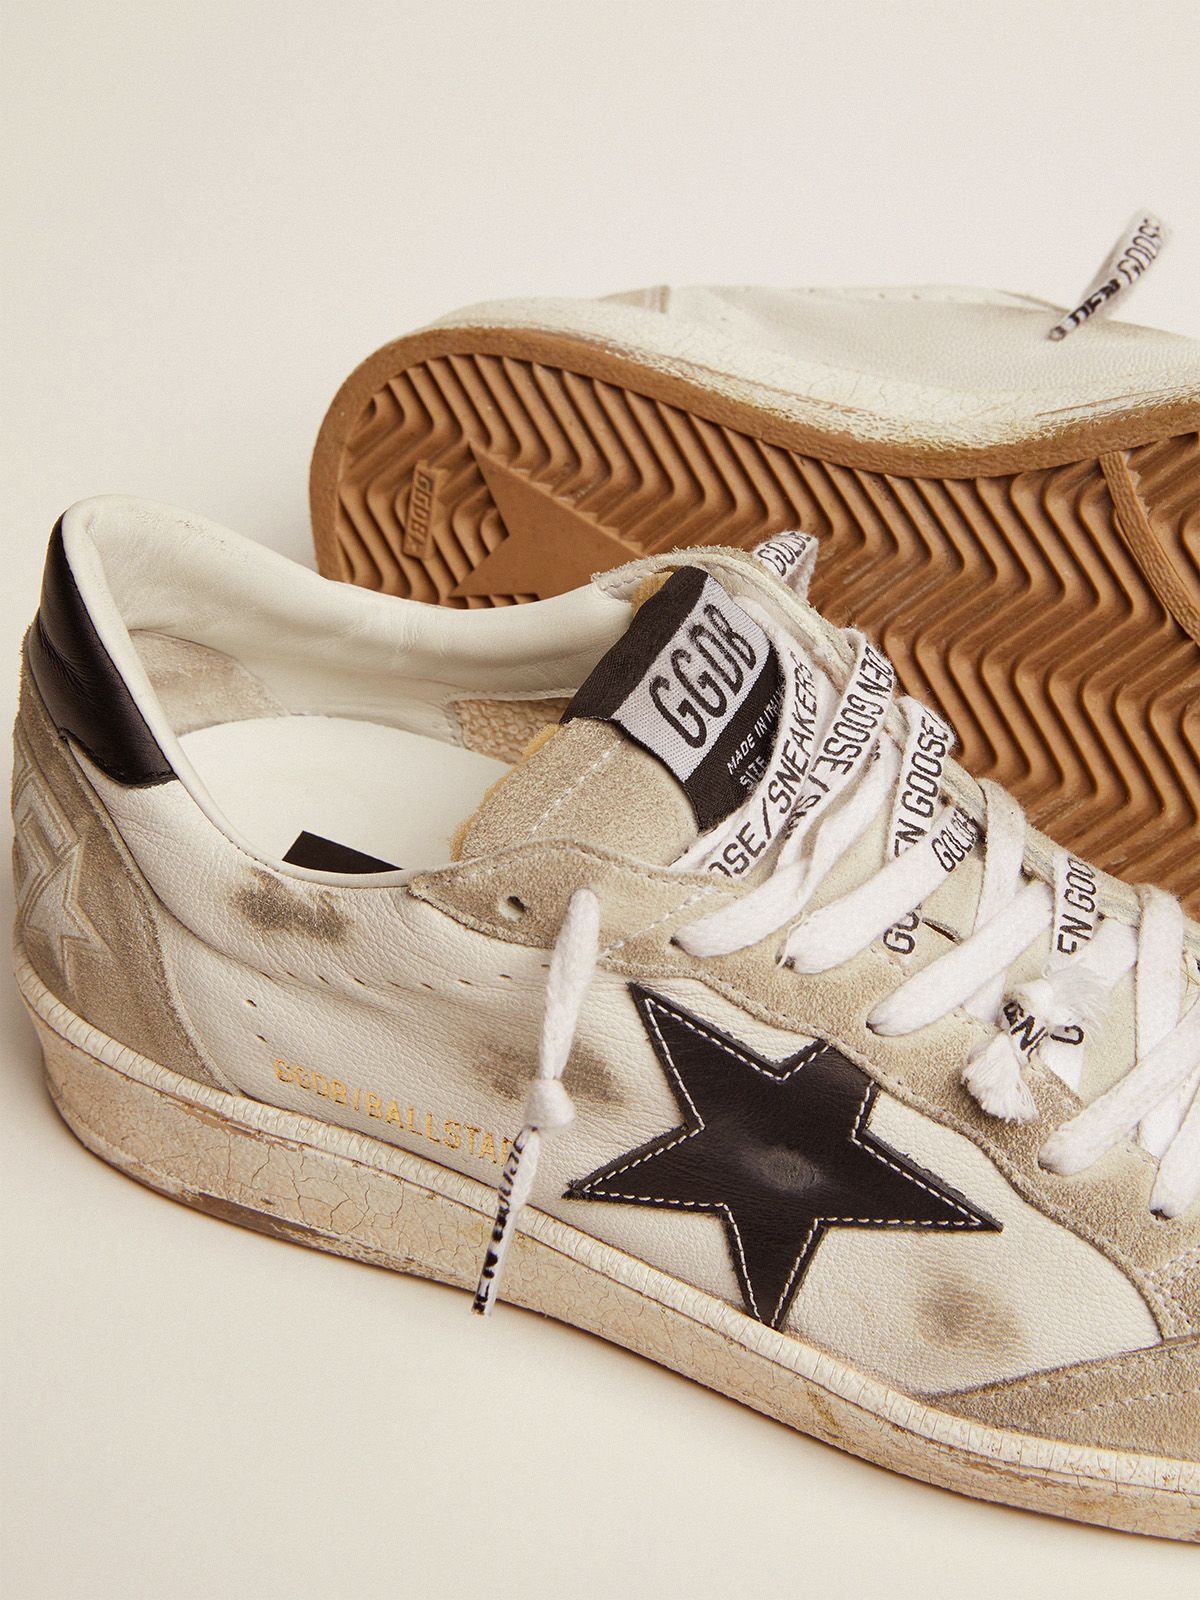 Ball Star sneakers in white leather and ice-gray suede with black 